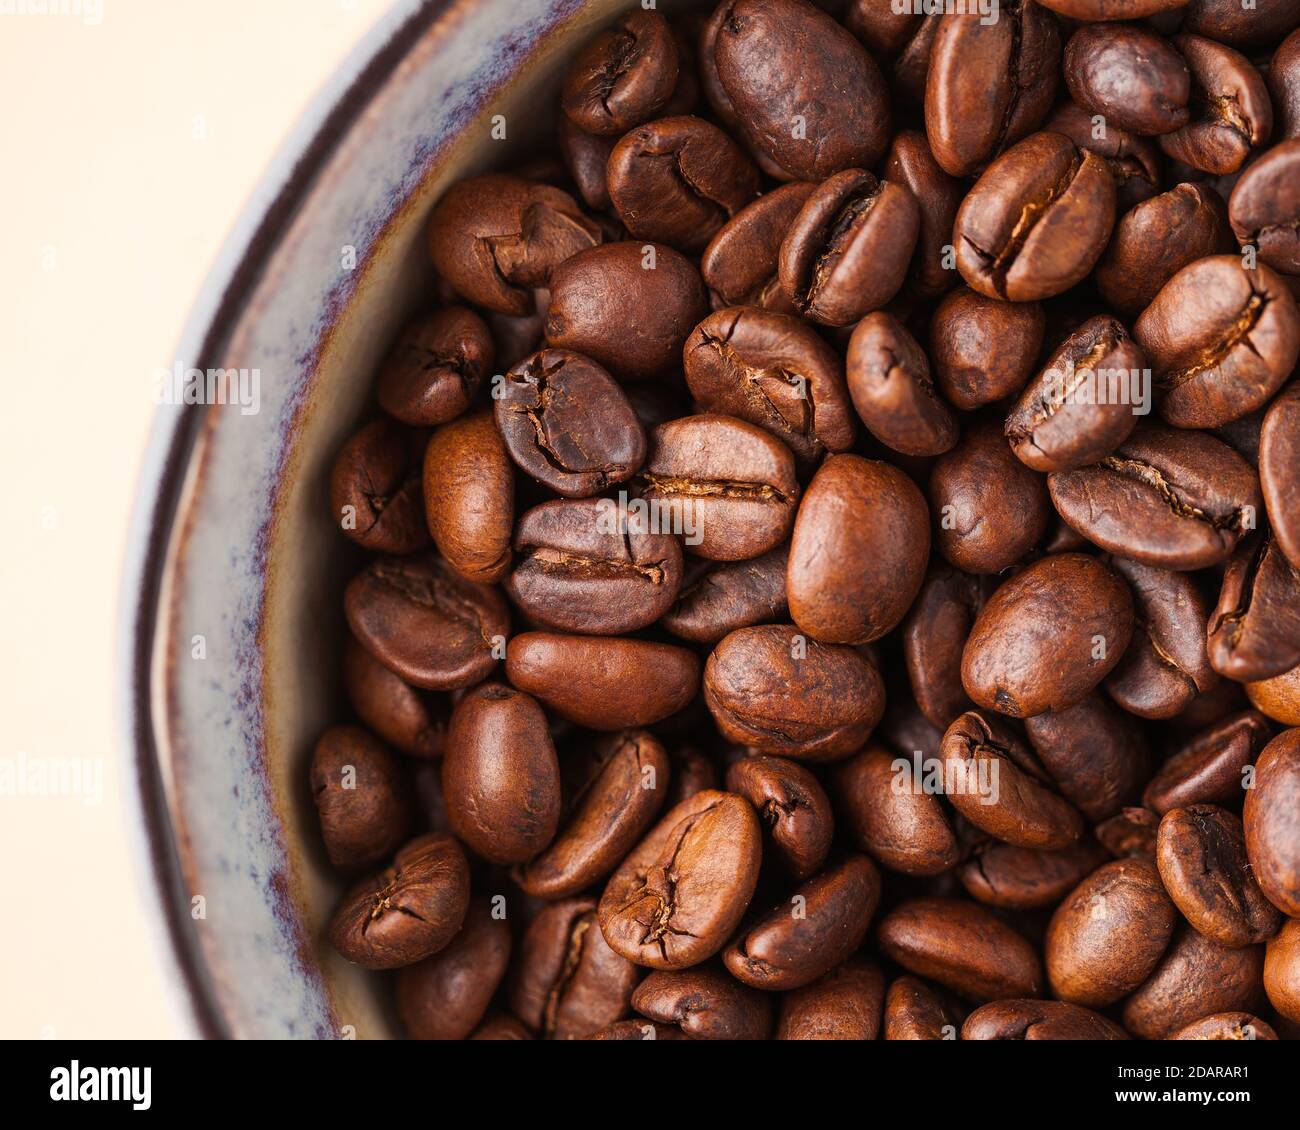 Coffee beans close-up on a light brown background. For screensavers, roasters and coffee sellers. Stock Photo